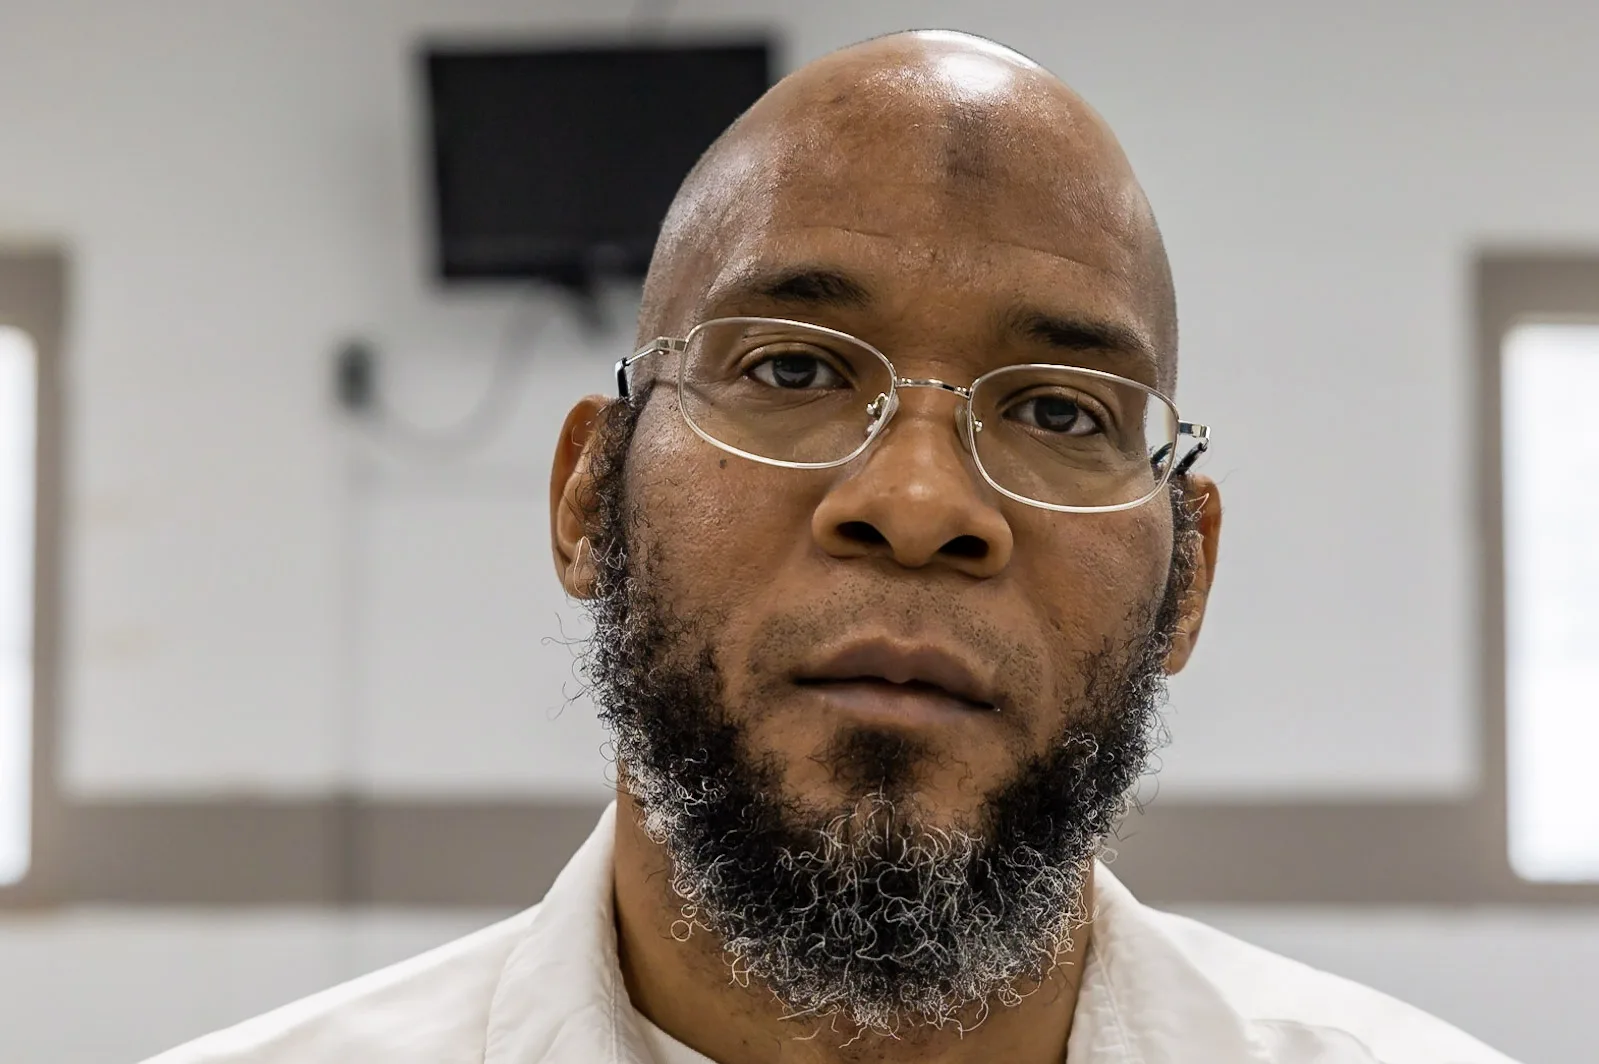 St. Louis County Prosecuting Attorney Wesley Bell Filed a Motion to Overturn Marcellus Williams’ Conviction. Here’s How You Can Help the Fight for Justice.